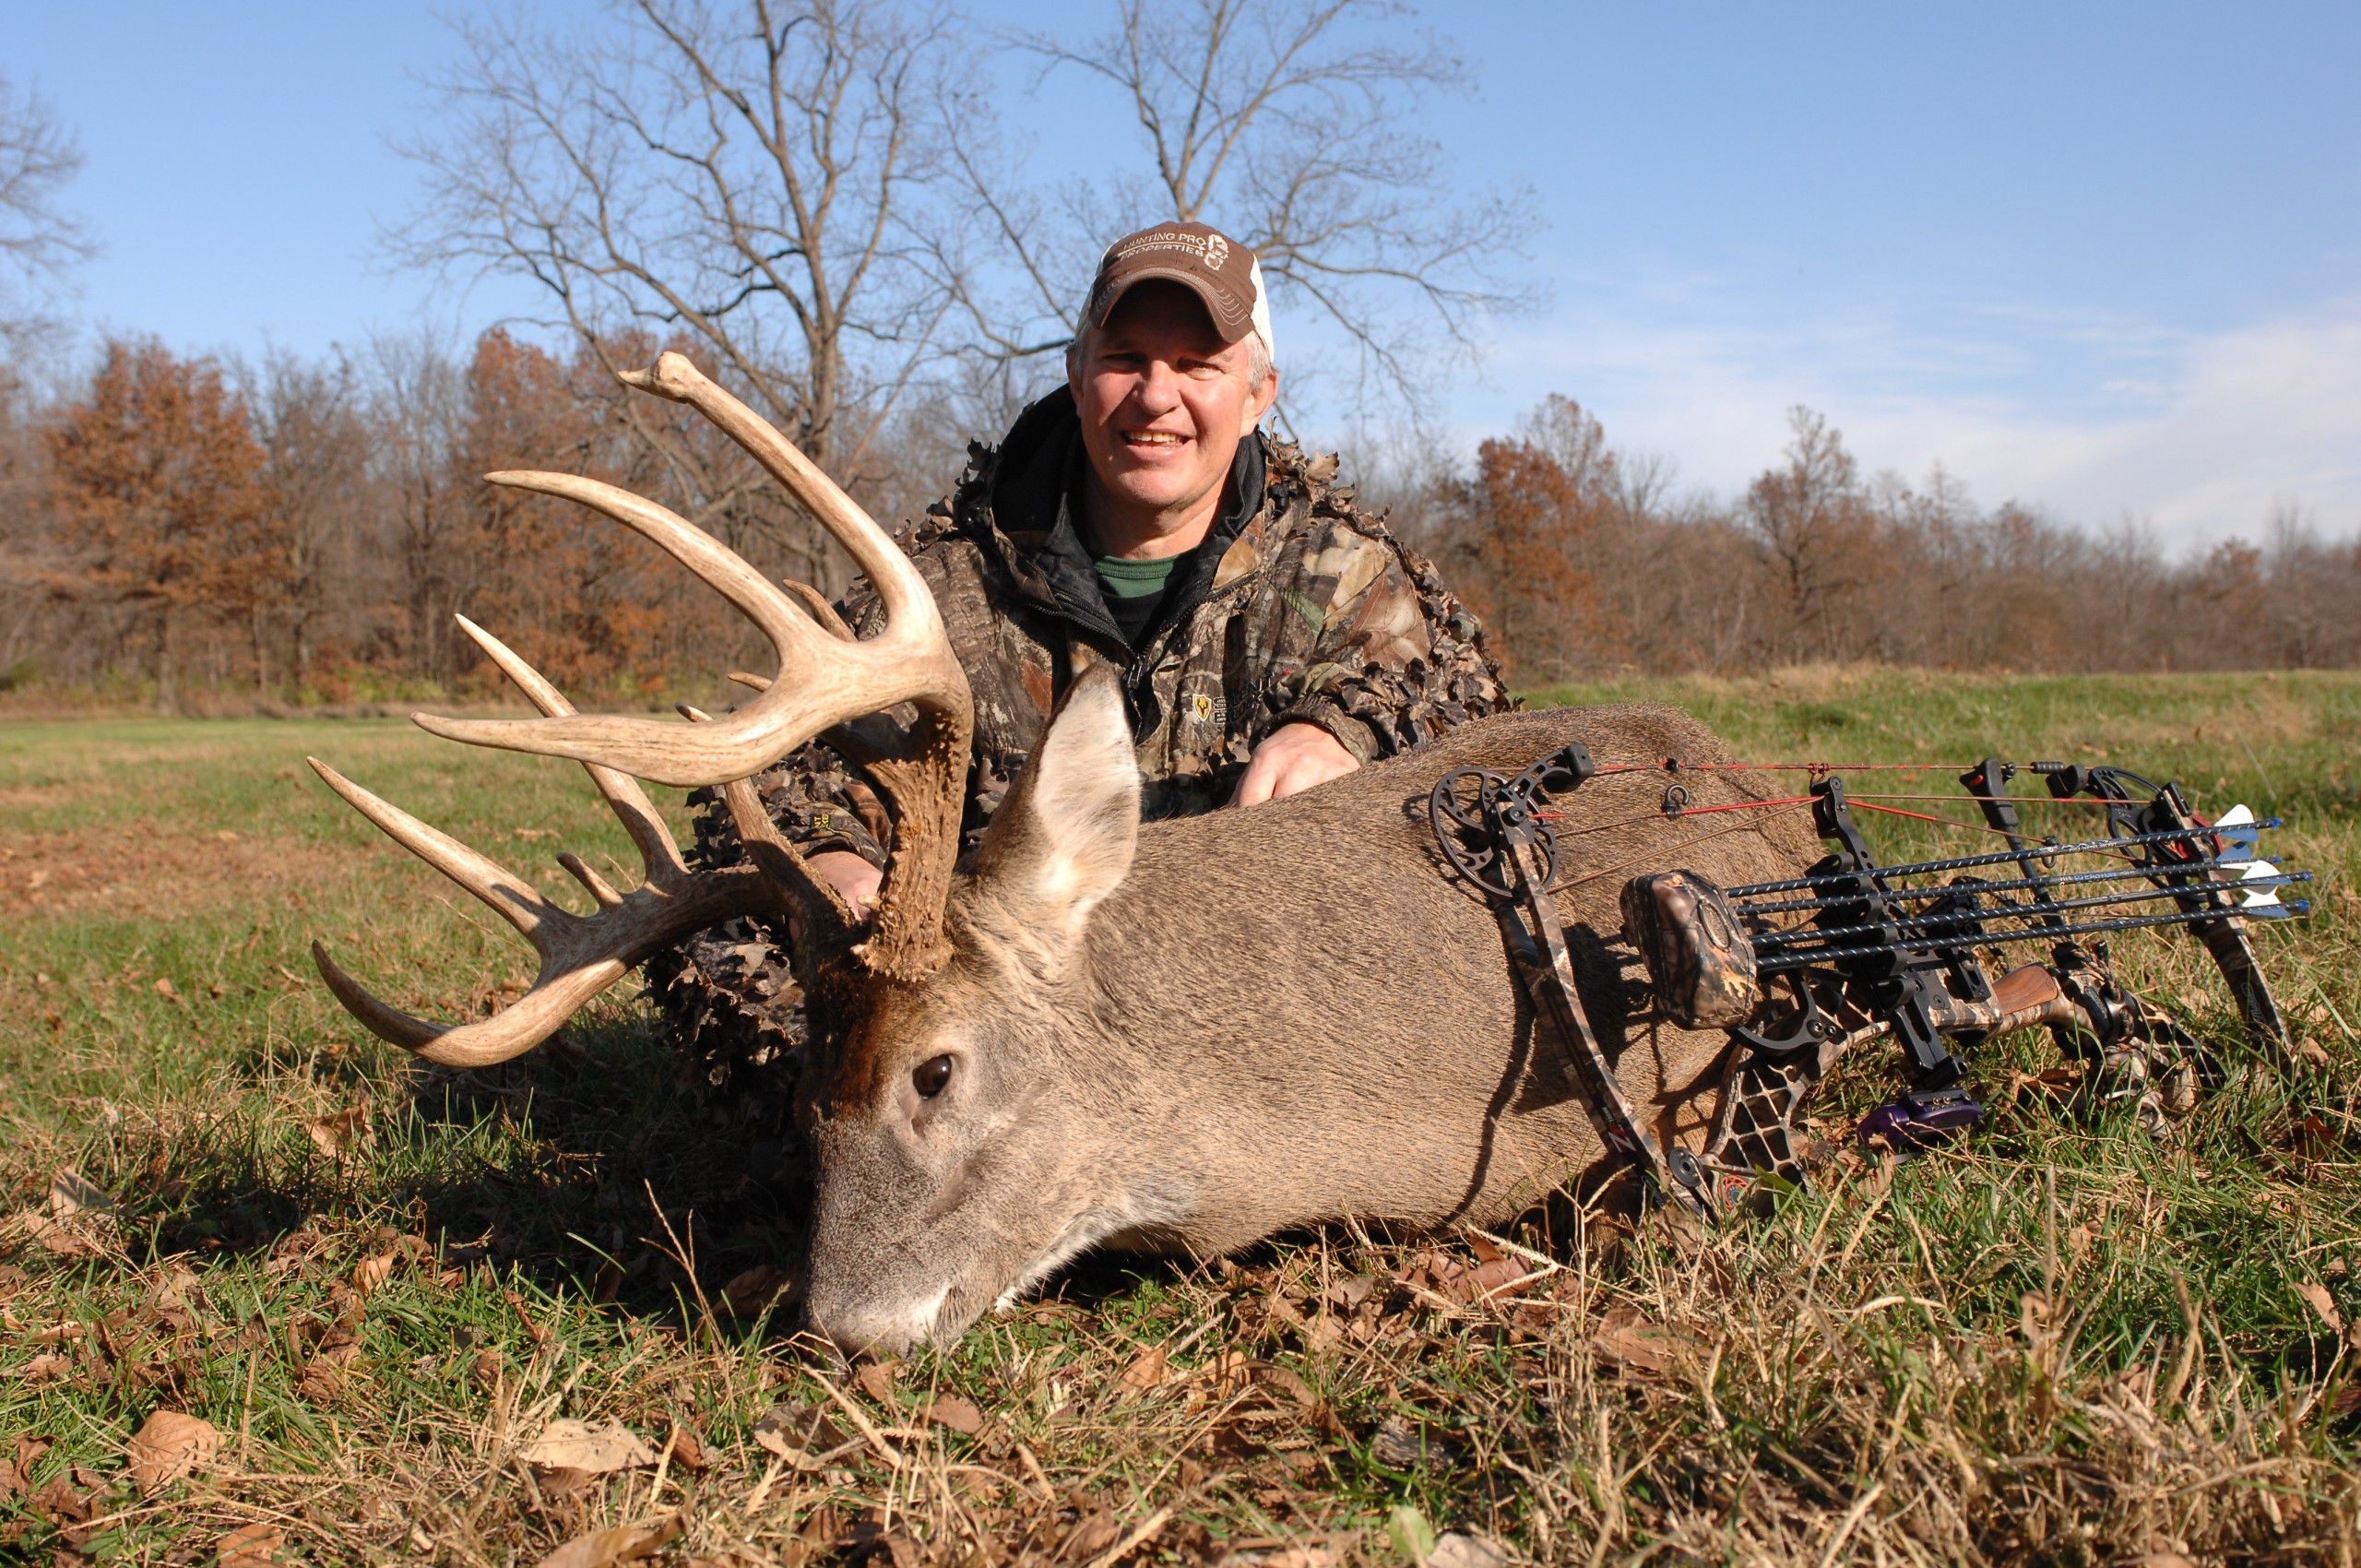 101 Best Deer Hunting Tips For The Rut | Outdoor Life-2021 Iowa Whitetail Rut